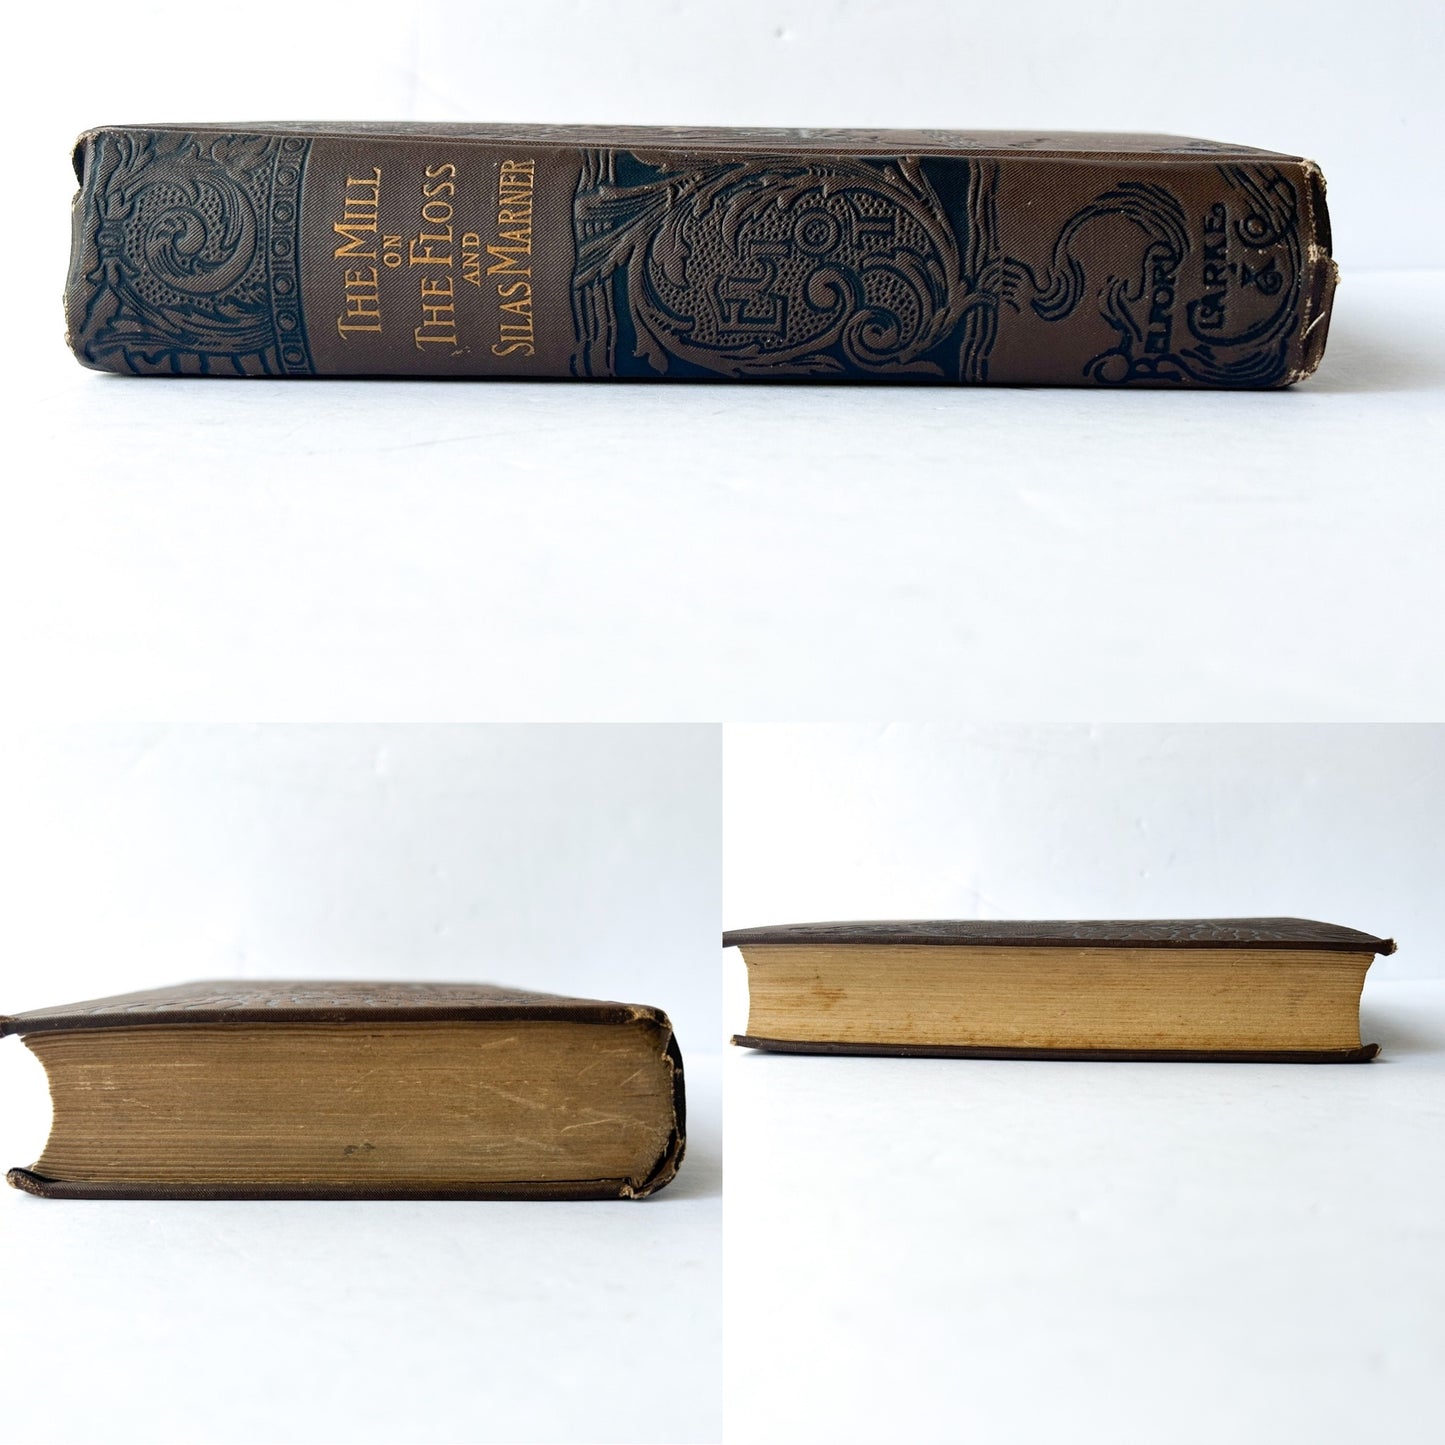 Antique Book, Eliot's Works by George Eliot, incl. The Mill on the Floss, Silas Marner